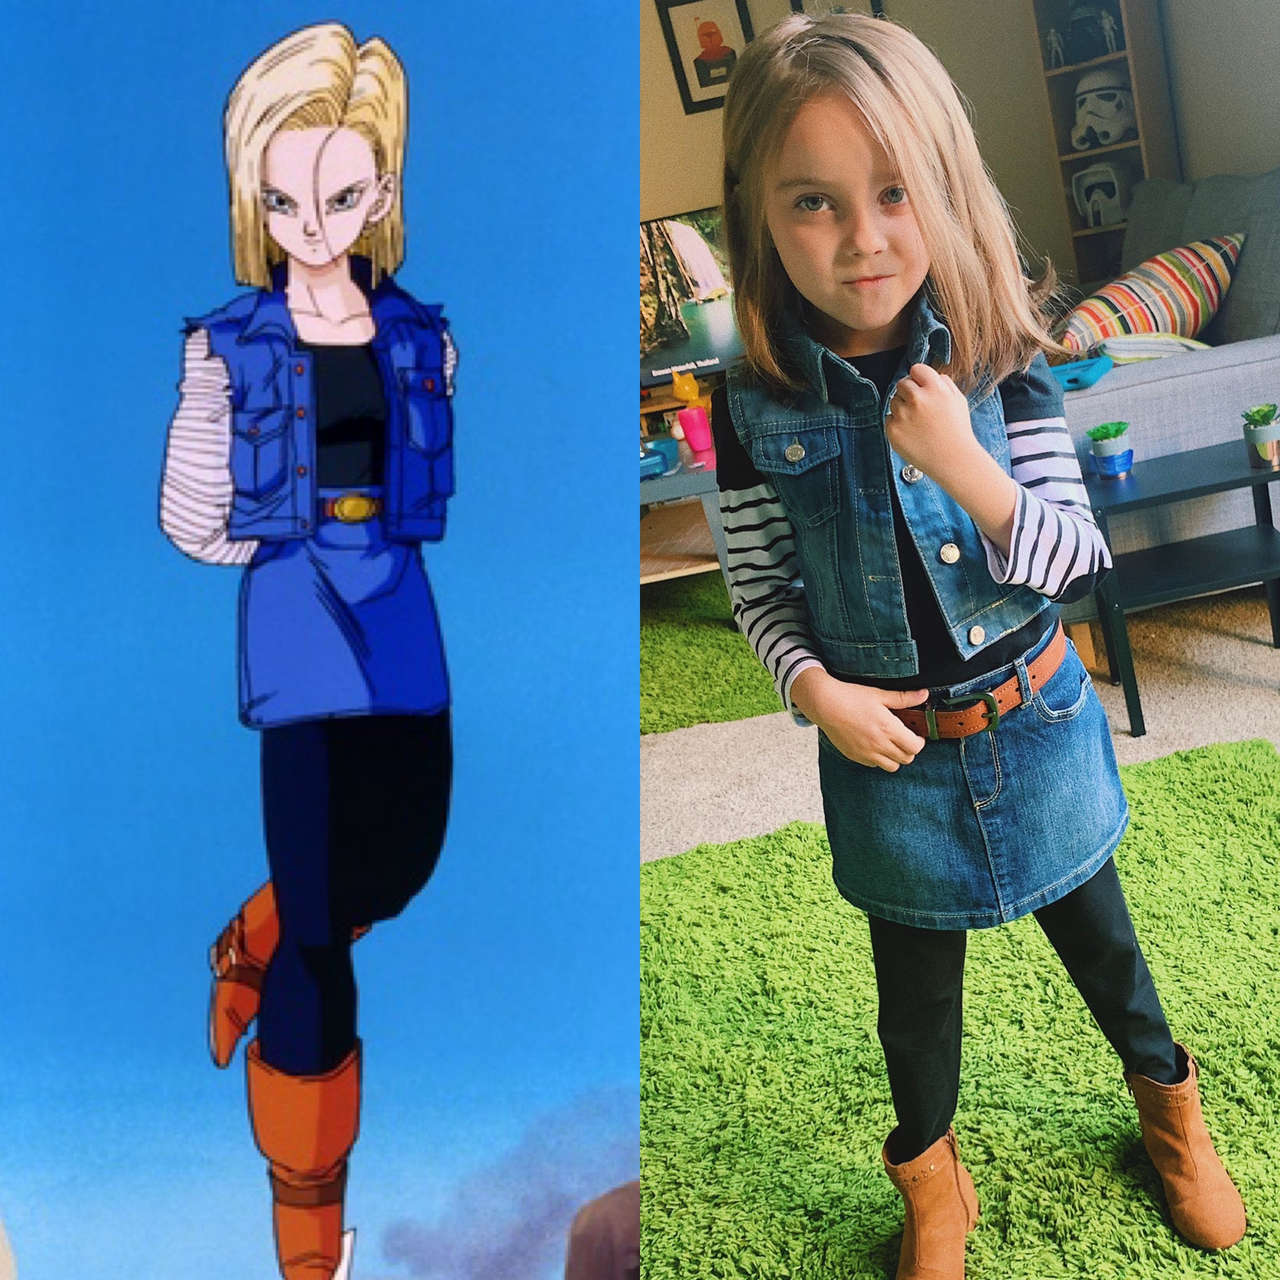 The Android 18 Cospla